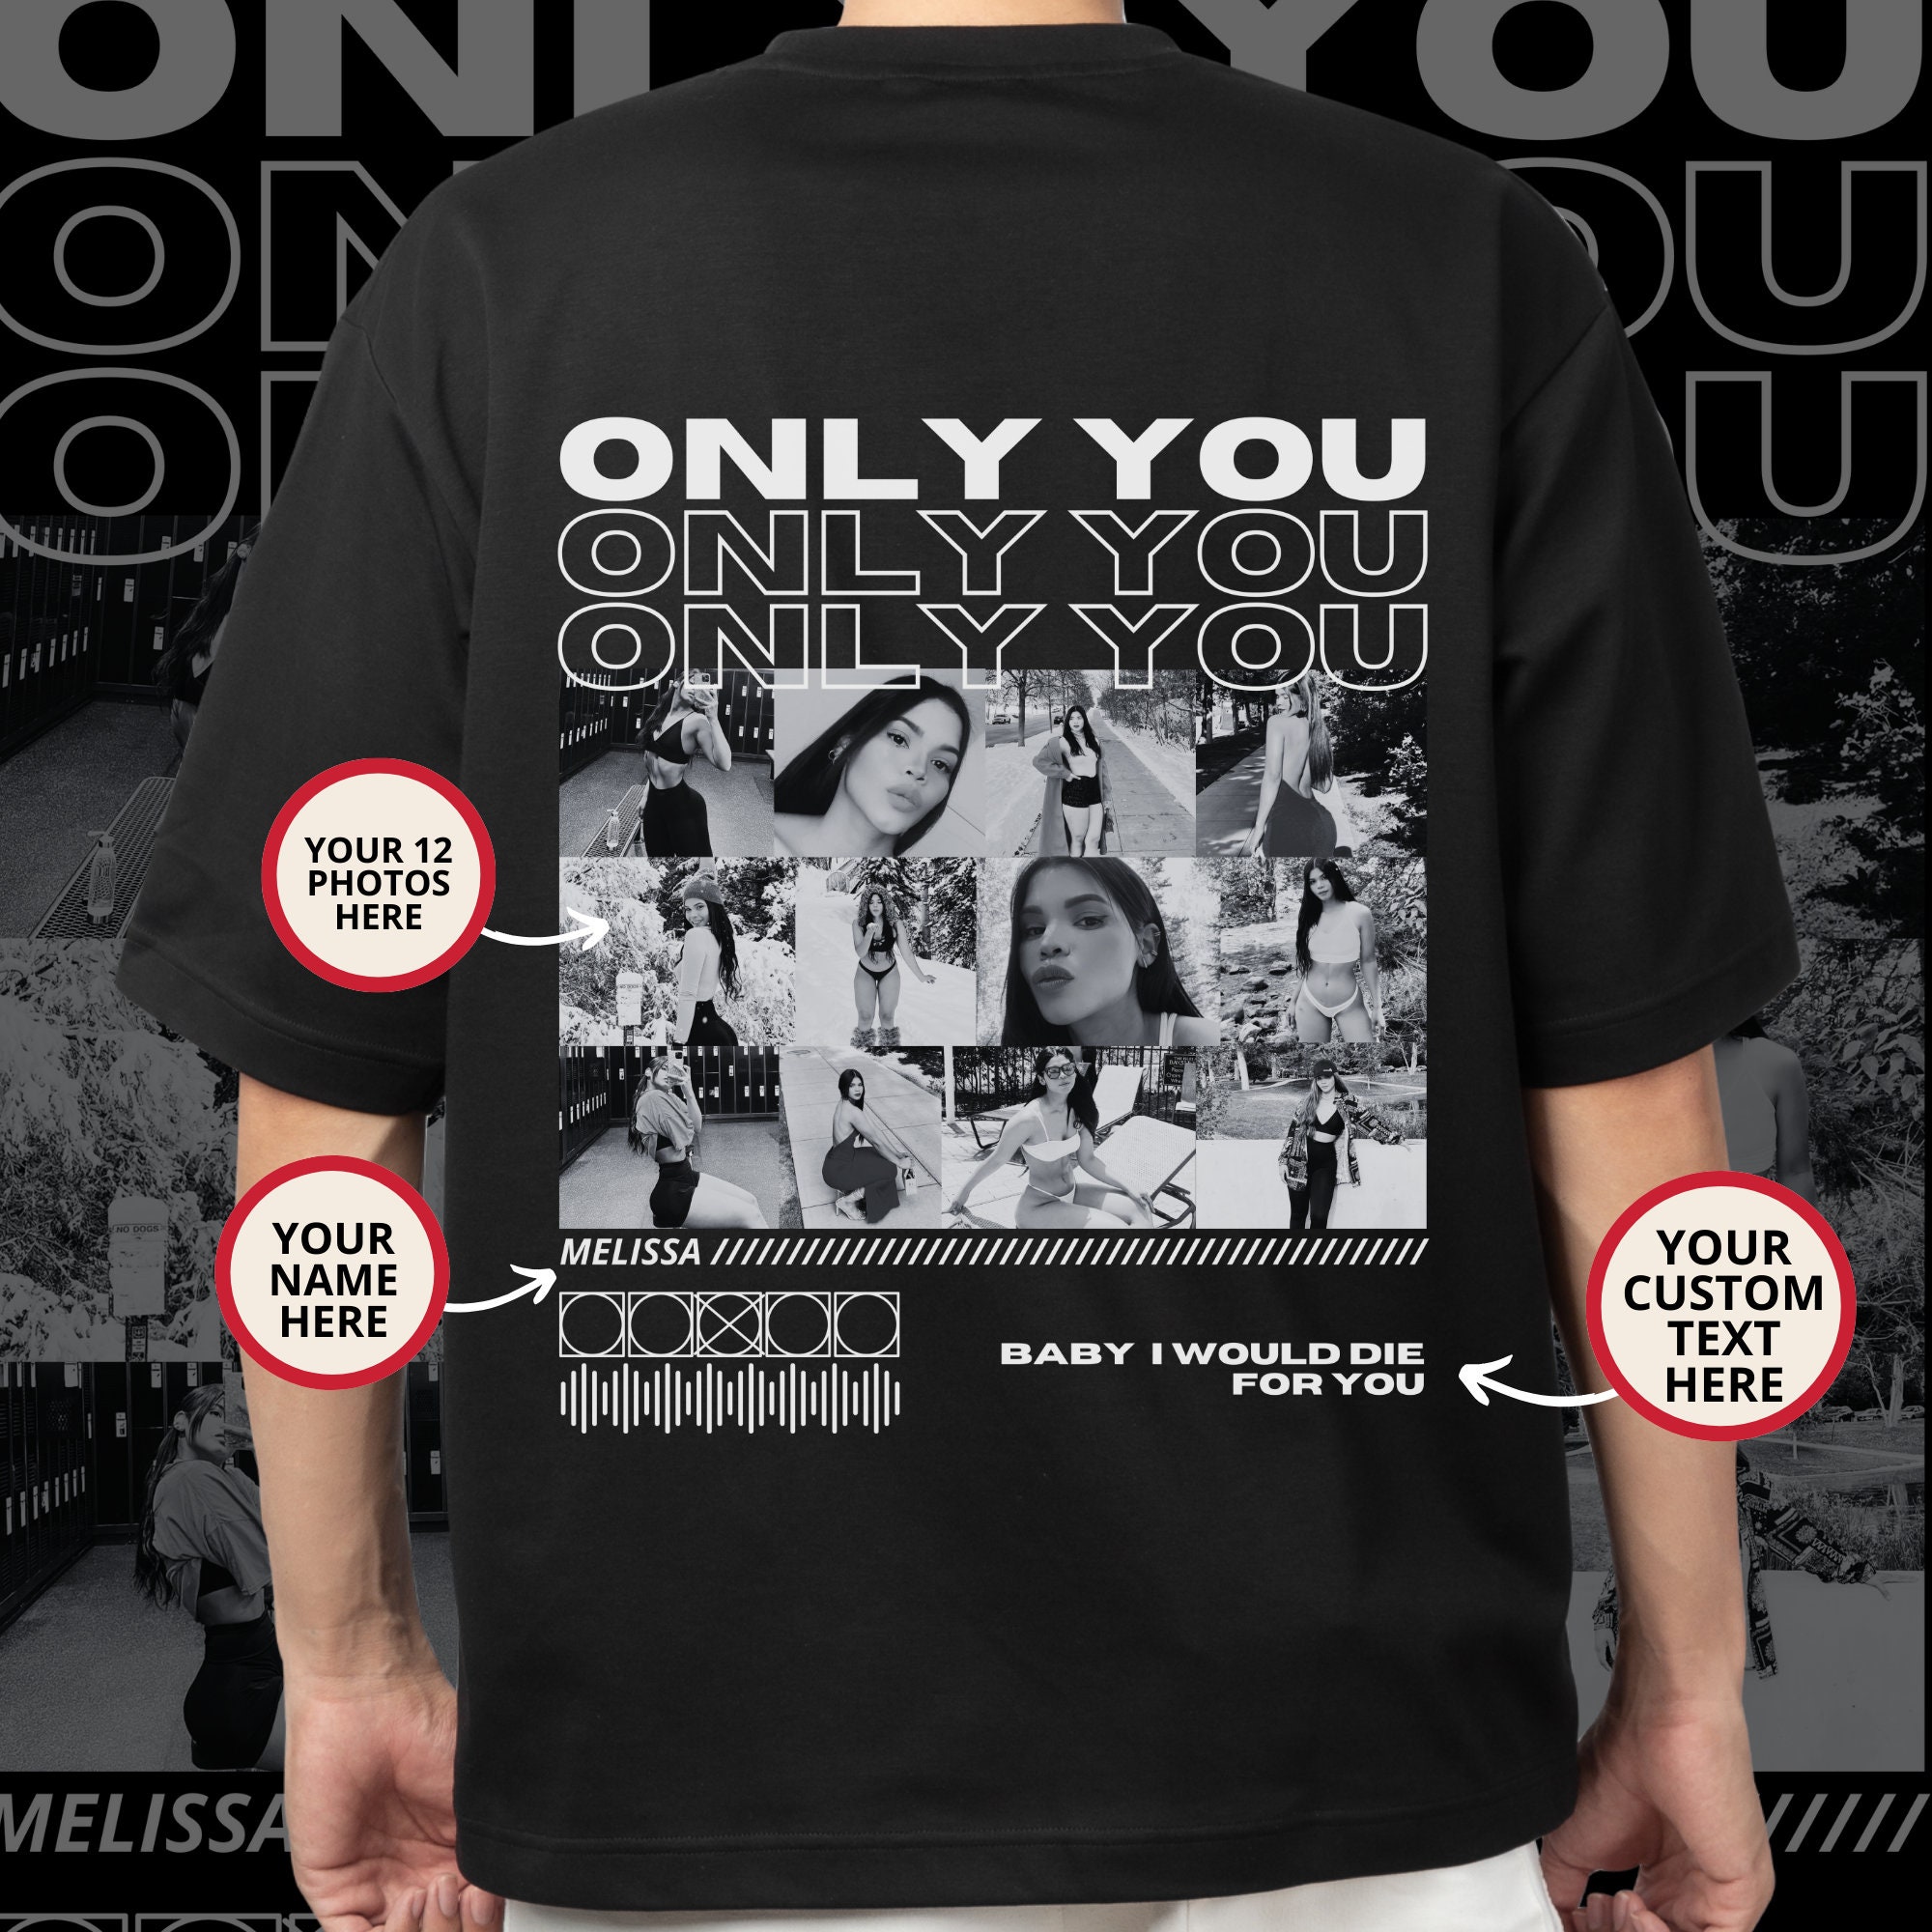 Only You Photo Shirt, Girlfriend Collage Shirt, Collage Photo Shirt